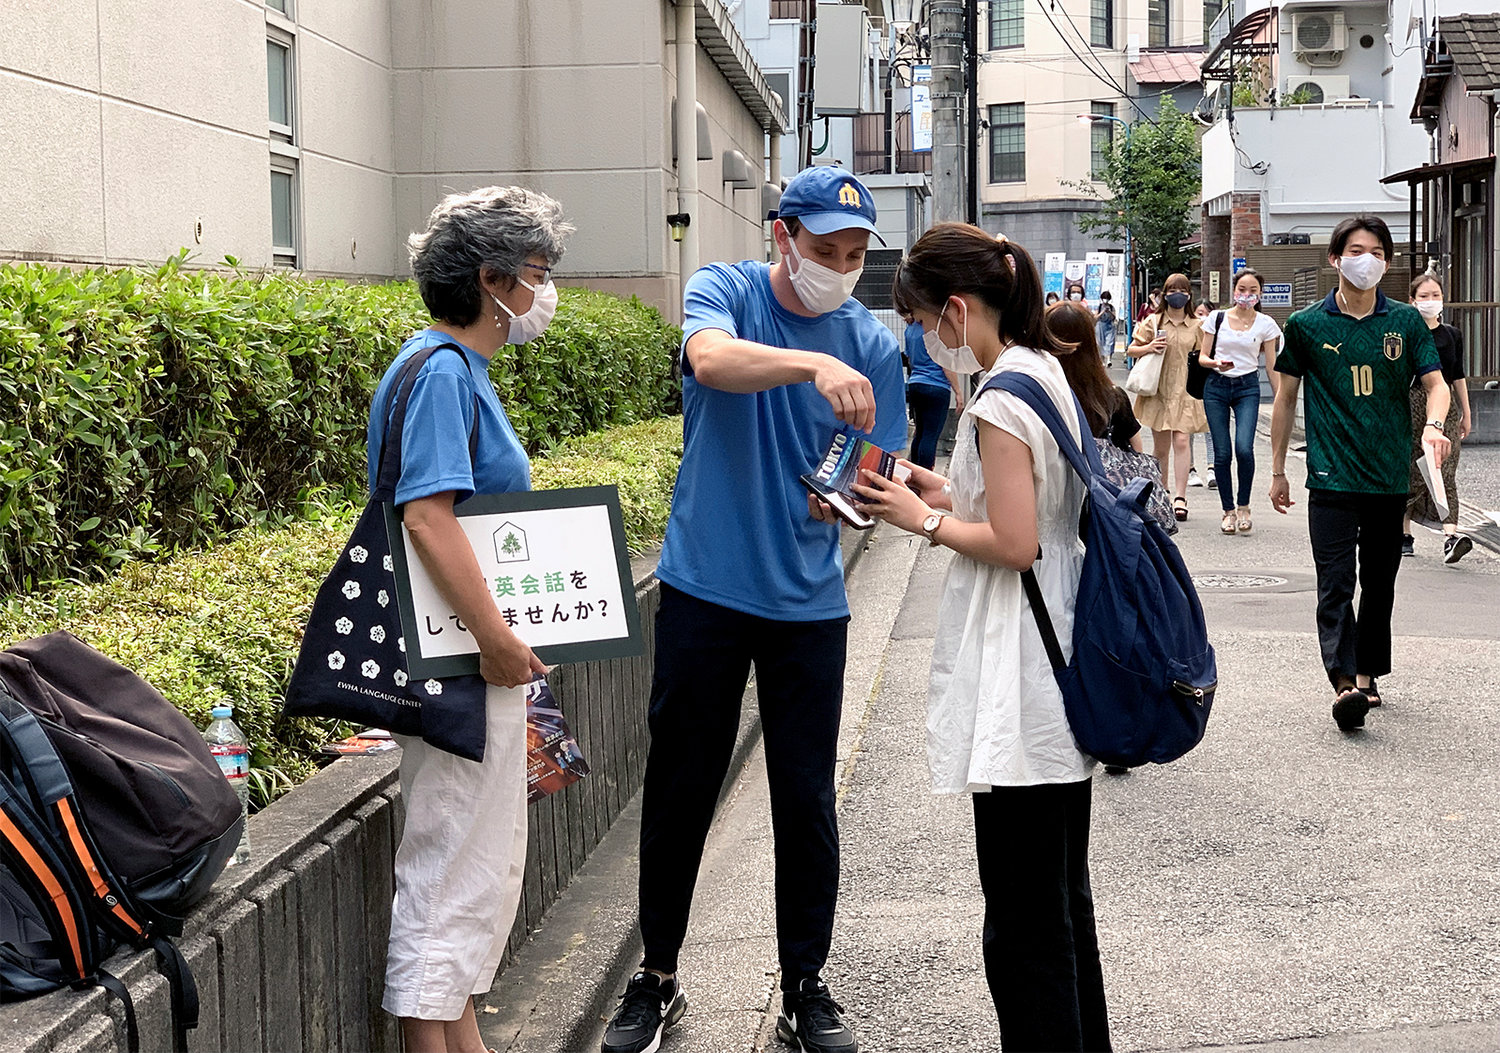 Pierce Hite, center, a Southern Baptist Convention International Mission Board missionary serving in Tokyo, Japan, explains a gospel tract to a woman, July 20, 2021. Hite and missionary Julie Bradford, left, took part in an outreach event called 5-Minute English that provides opportunities for people to practice conversational English on the street.  This photo is being used for non-commercial purpose and not in connection with selling a good or service.